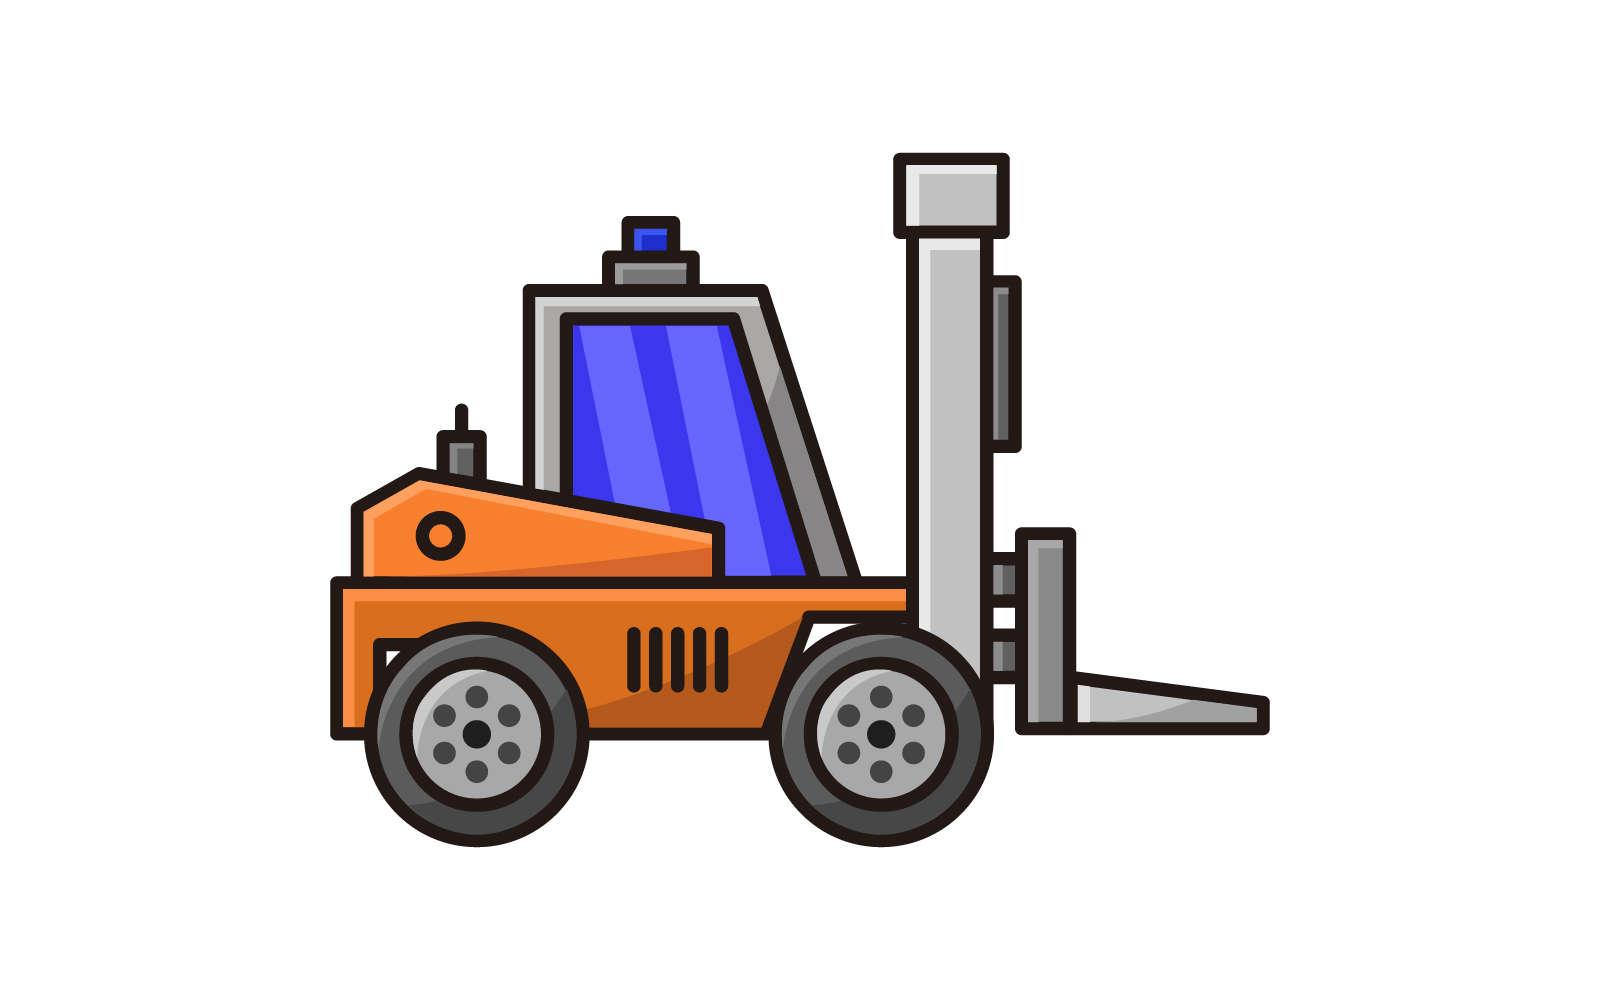 Forklift illustrated in vector on a white